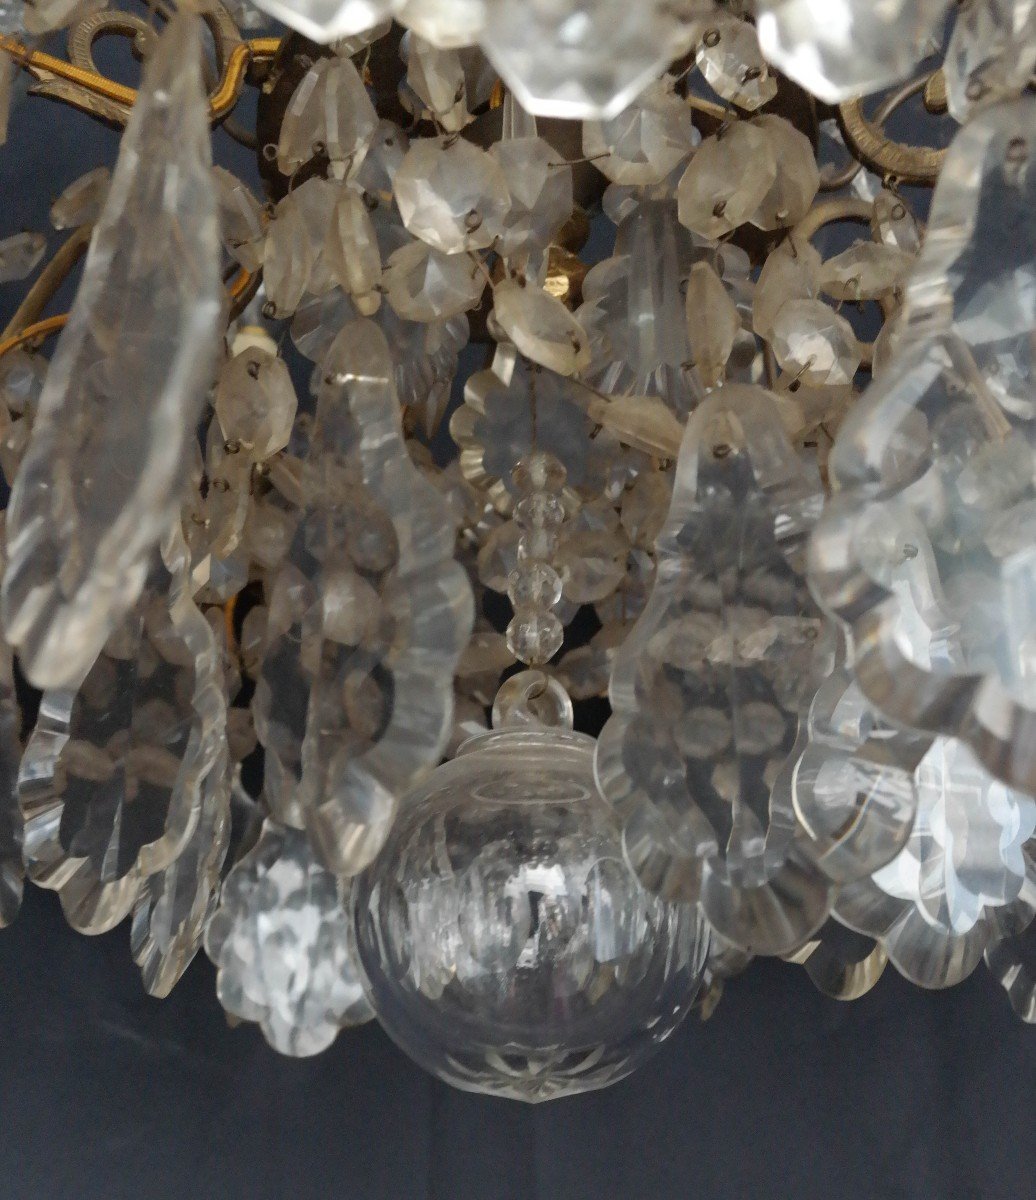 Tassel Chandelier With 8 Arms Of Lights-photo-3